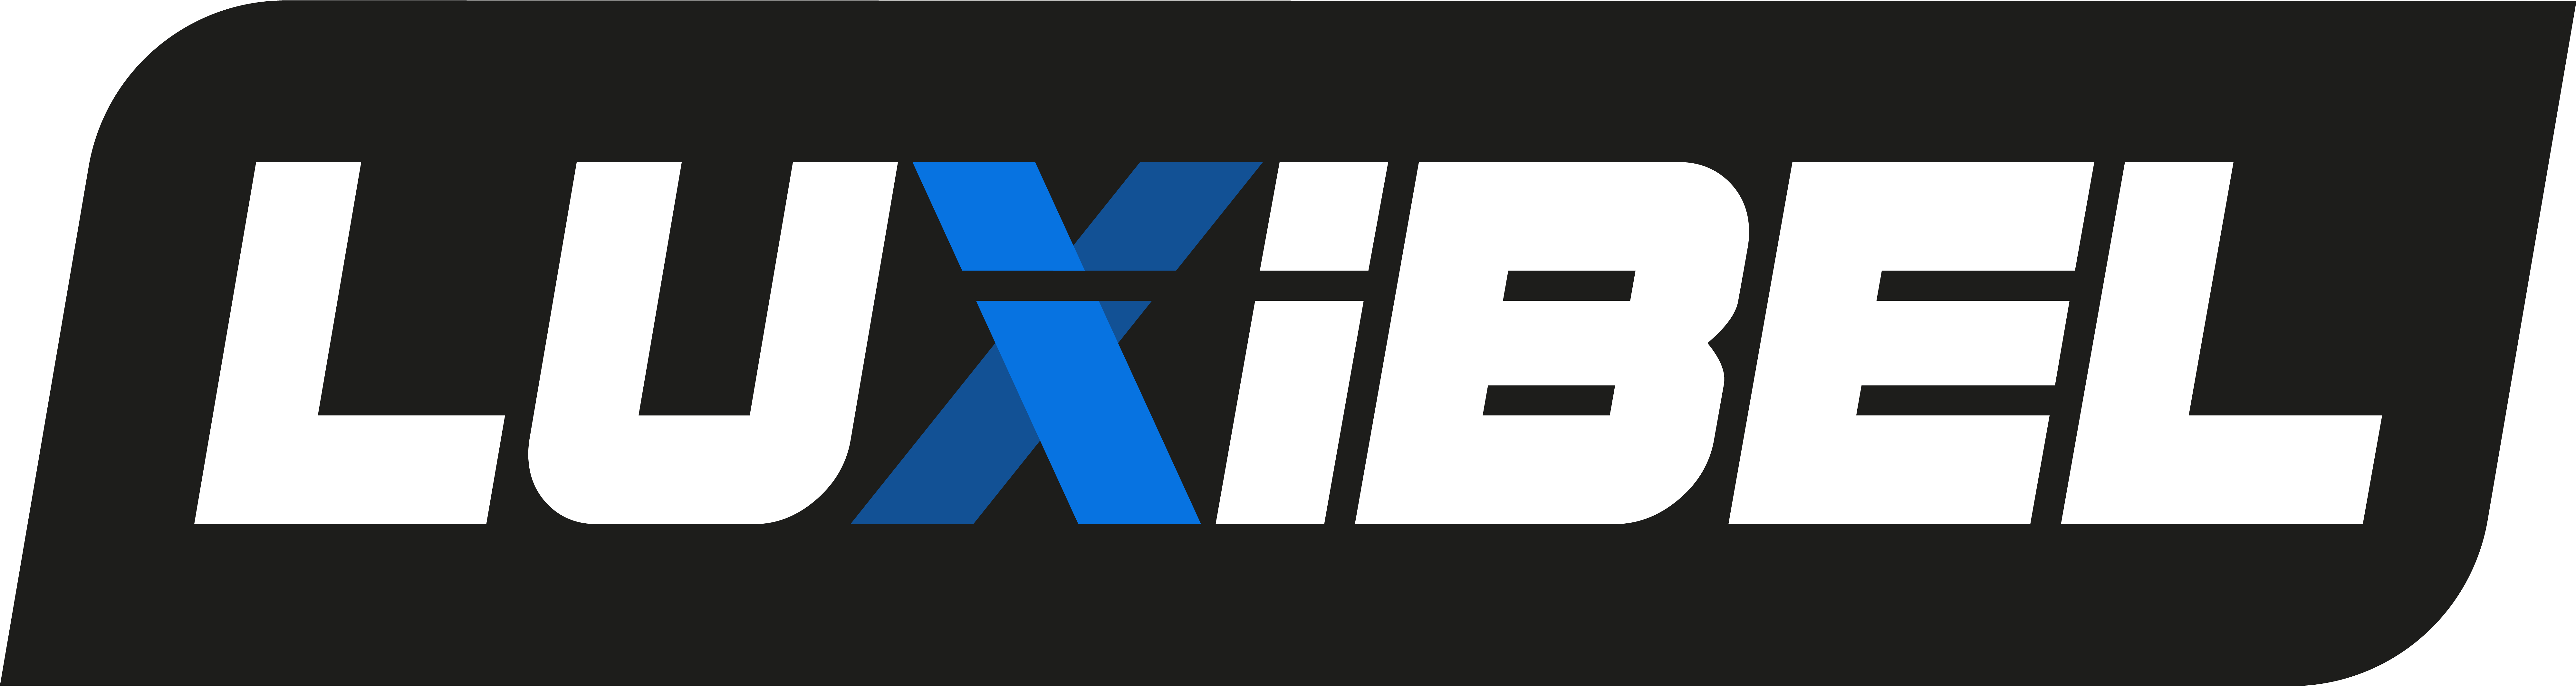 The official Luxibel logo